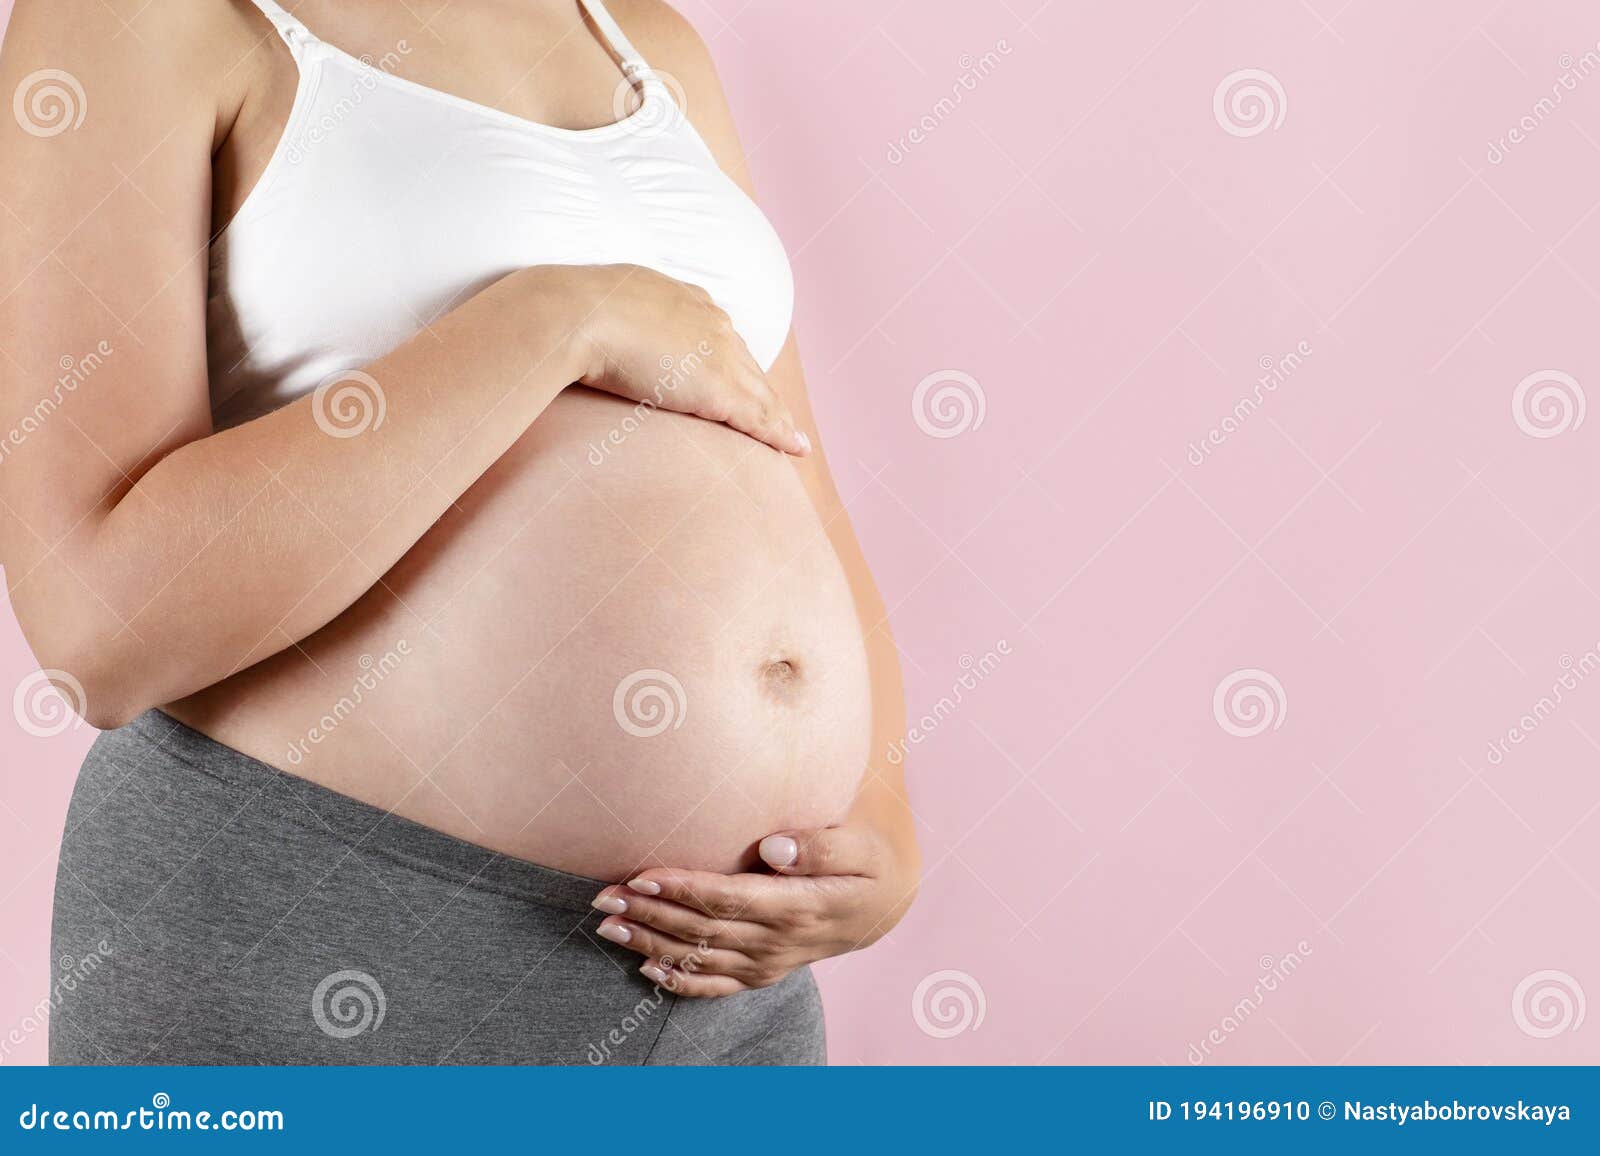 Close Up of Pregnant Woman Wearing Supportive Seamless Maternity Bra & Grey  Yoga Pants, Arms on Her Belly. Female Hands Wrapped Stock Photo - Image of  hands, maternity: 194196910